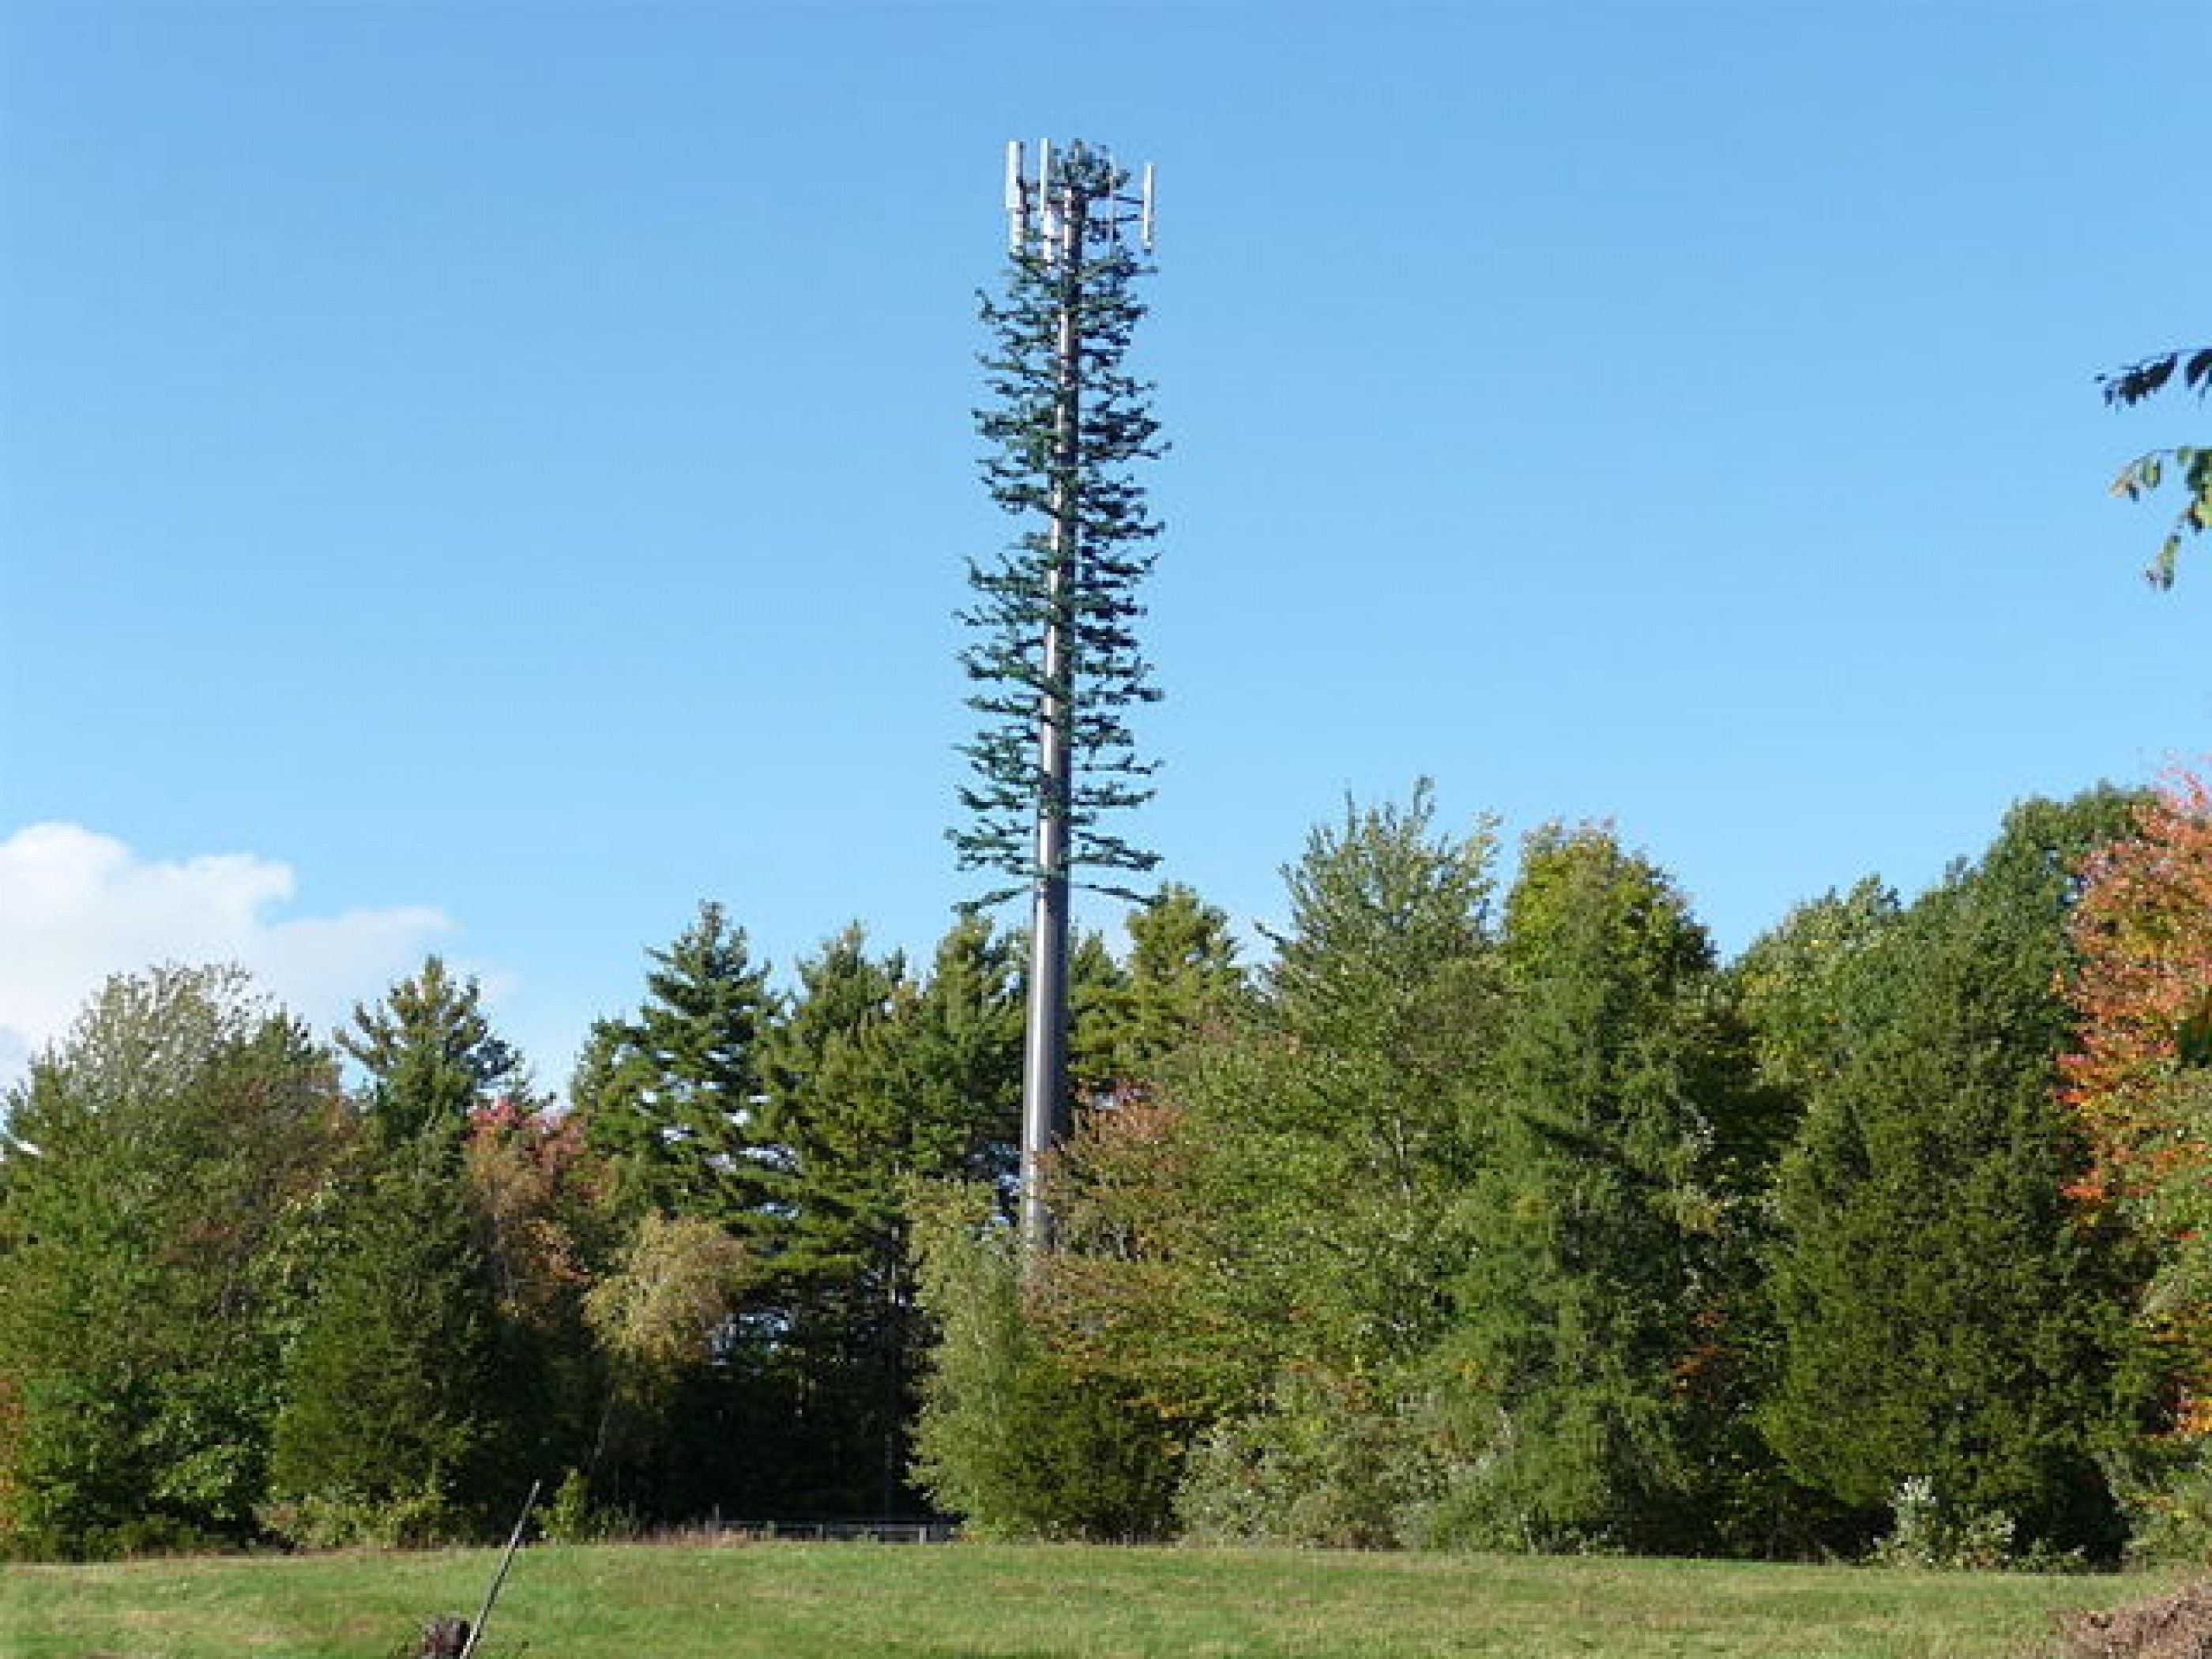 Fig. 3: Cell phone tower cleverly disguised to look like an evergreen tree. Located in New Hampshire.